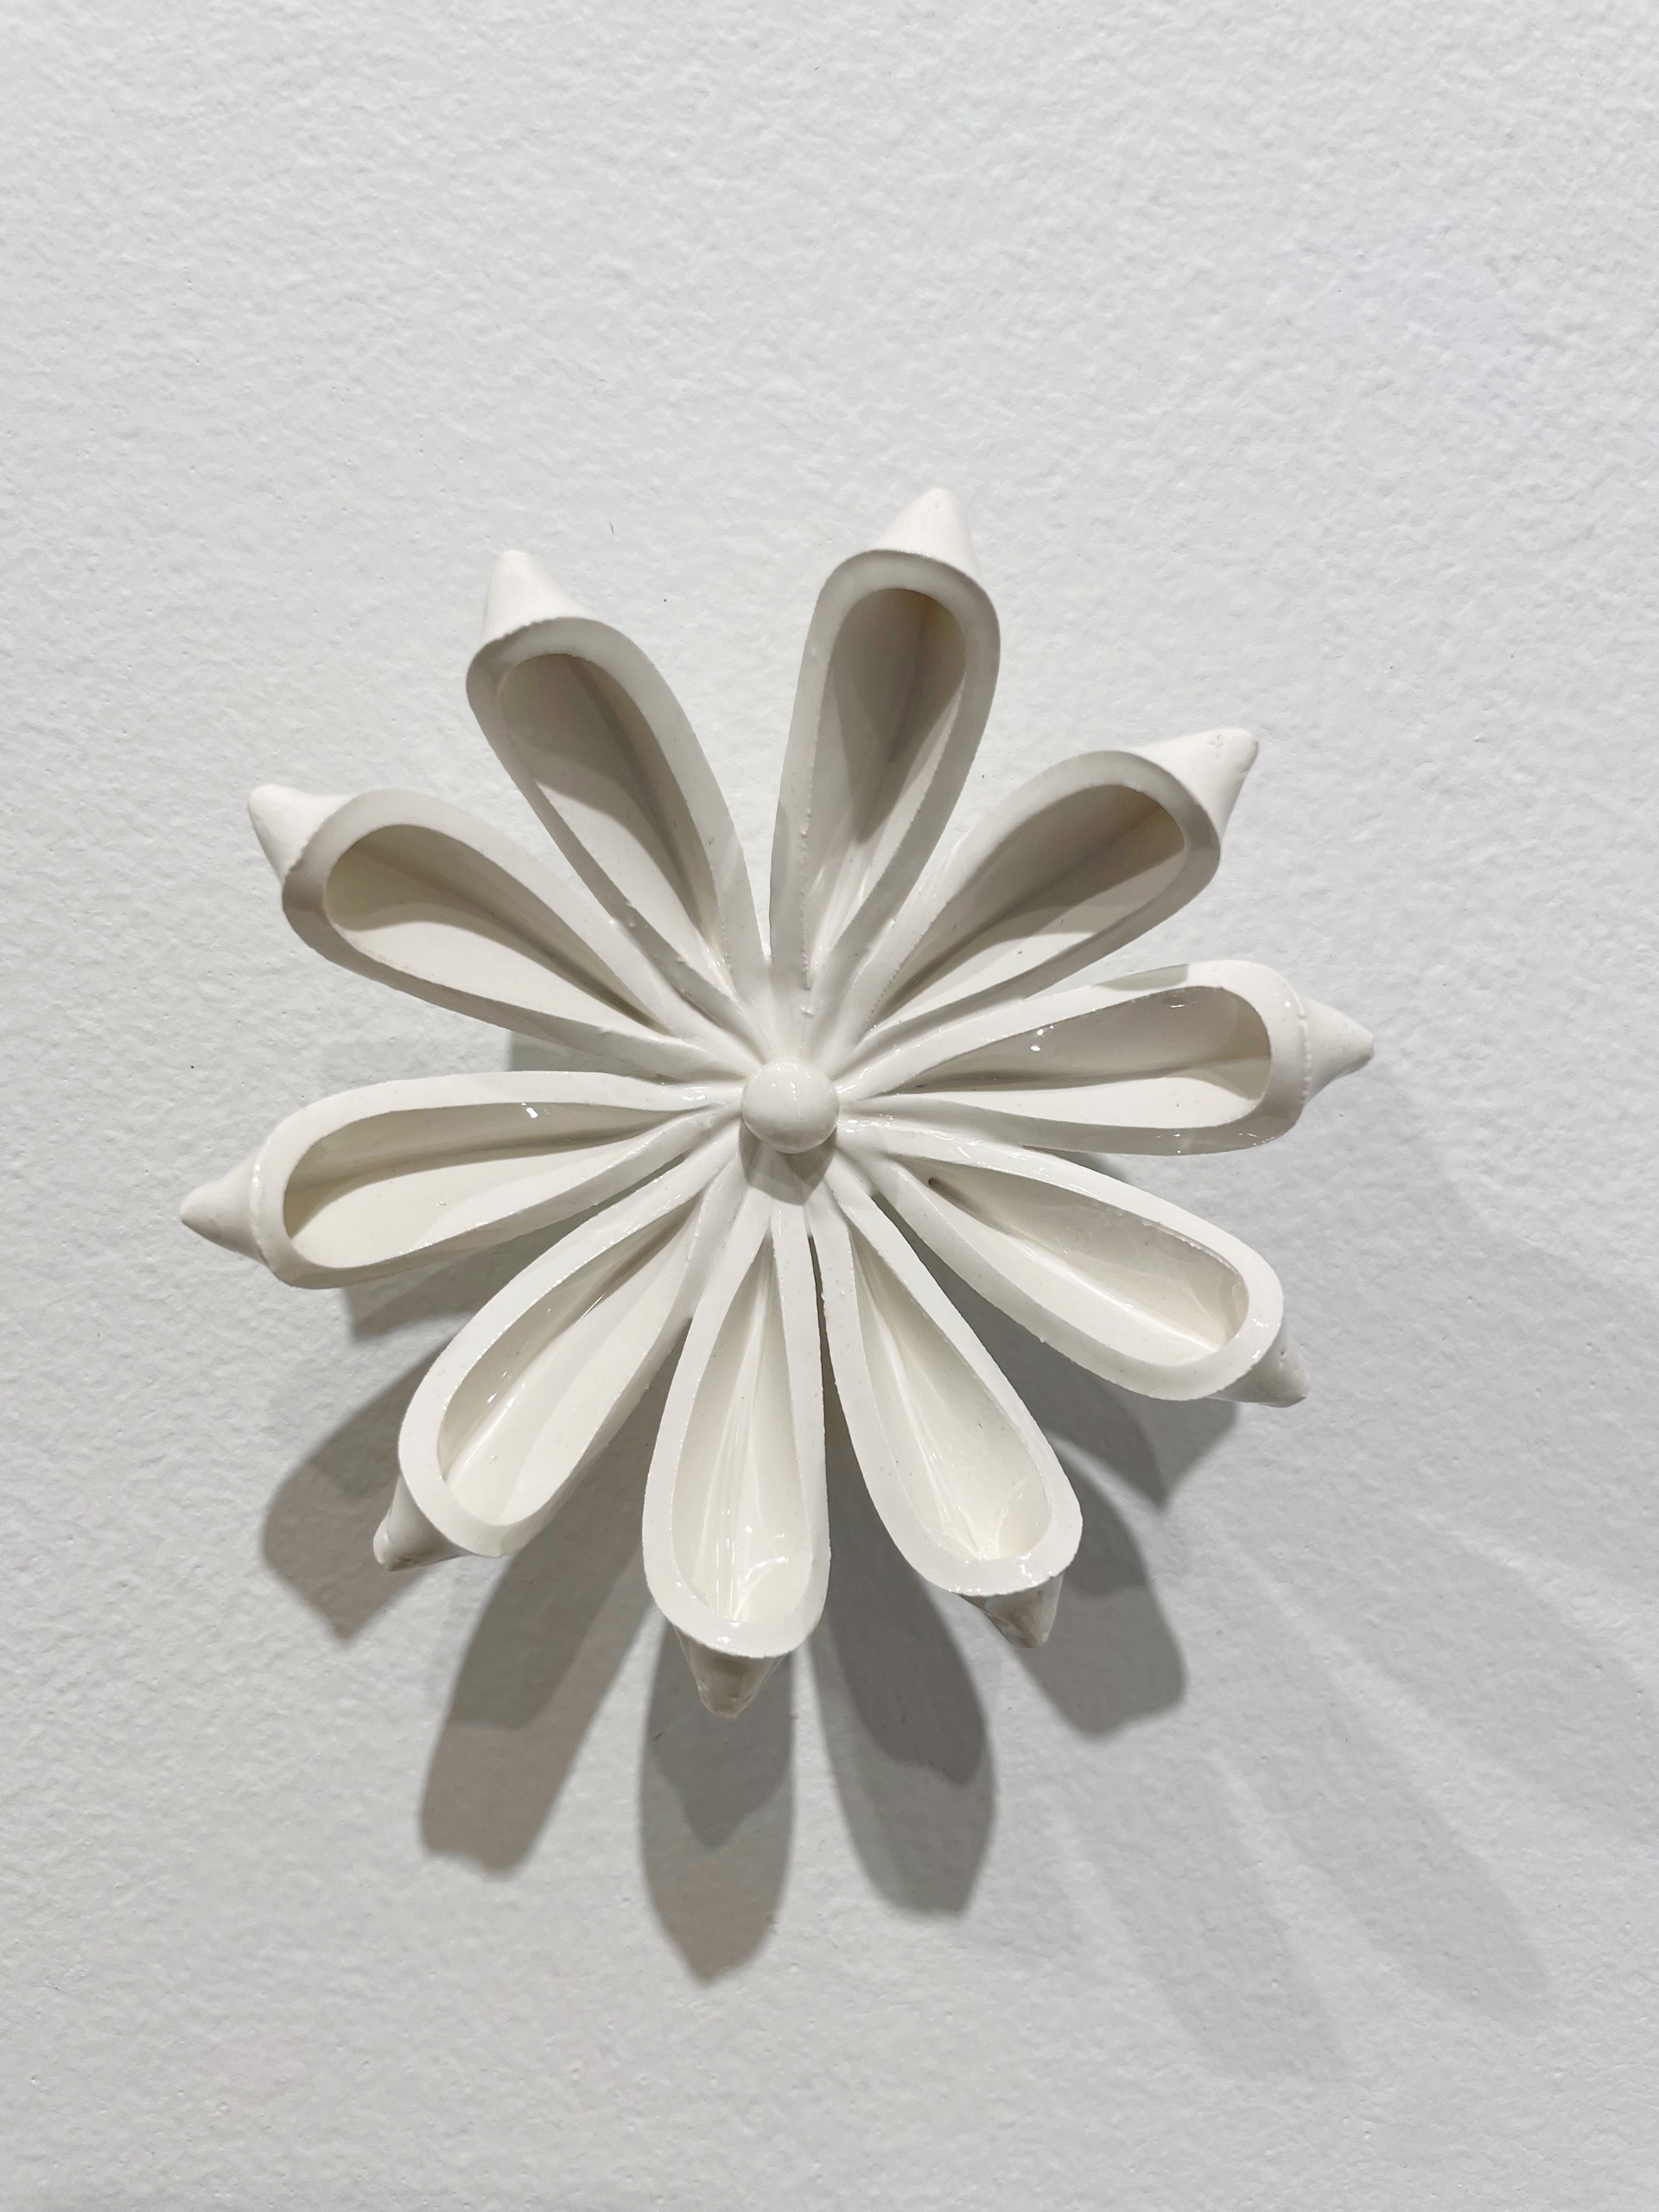 Floral Wall Sculpture by Isabelle Coppinger